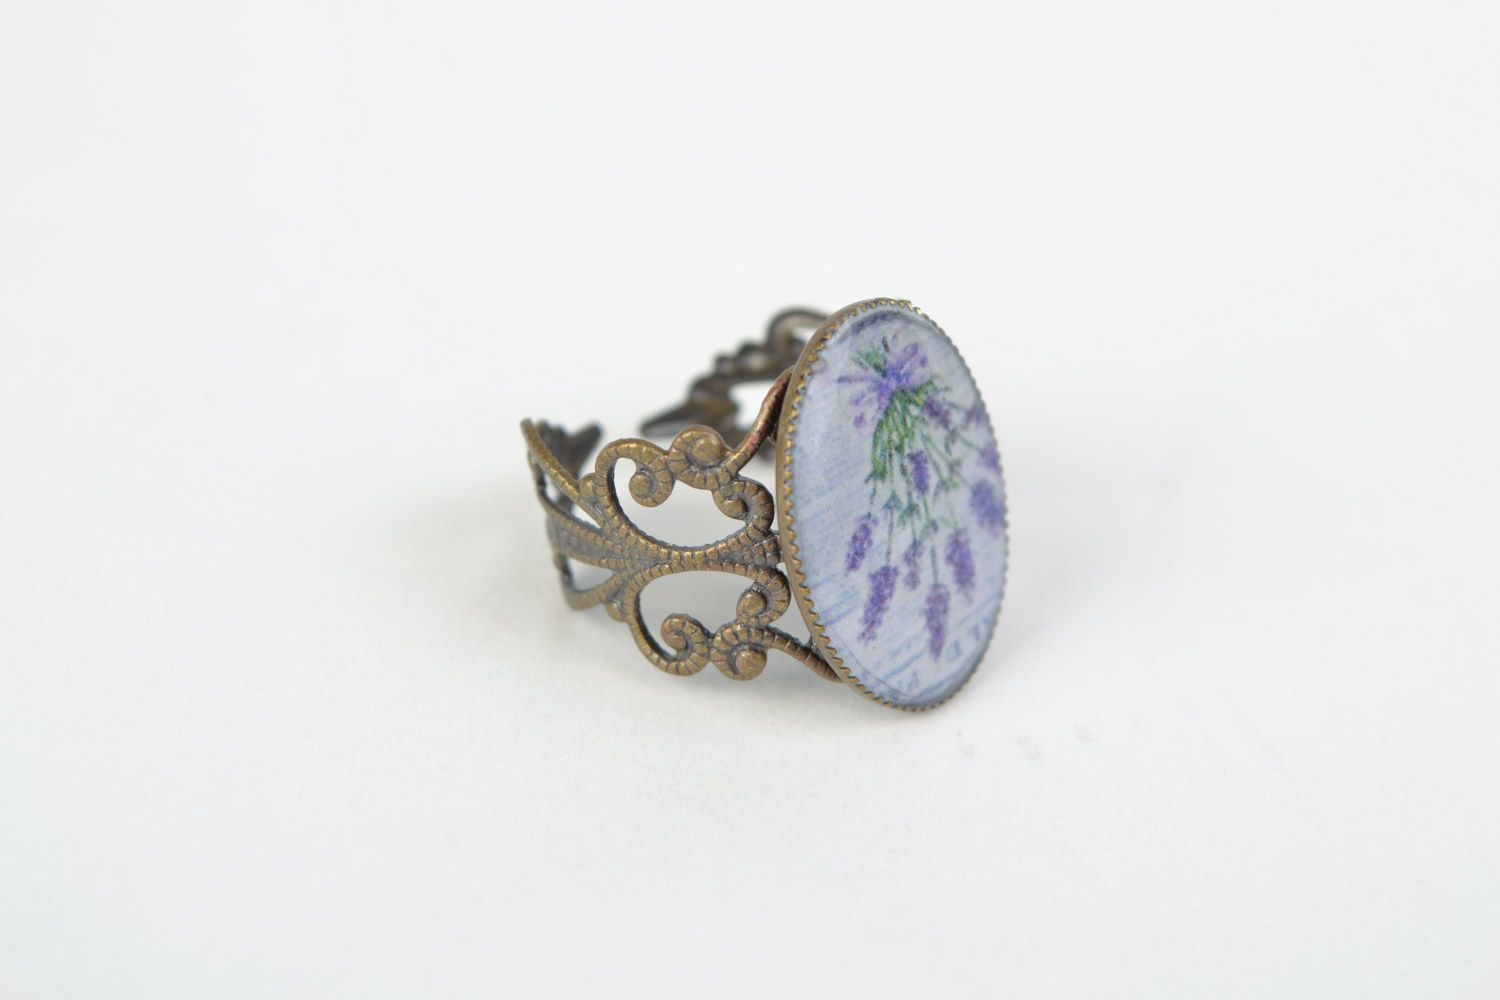 Handmade oval jewelry resin ring with lavender image photo 3